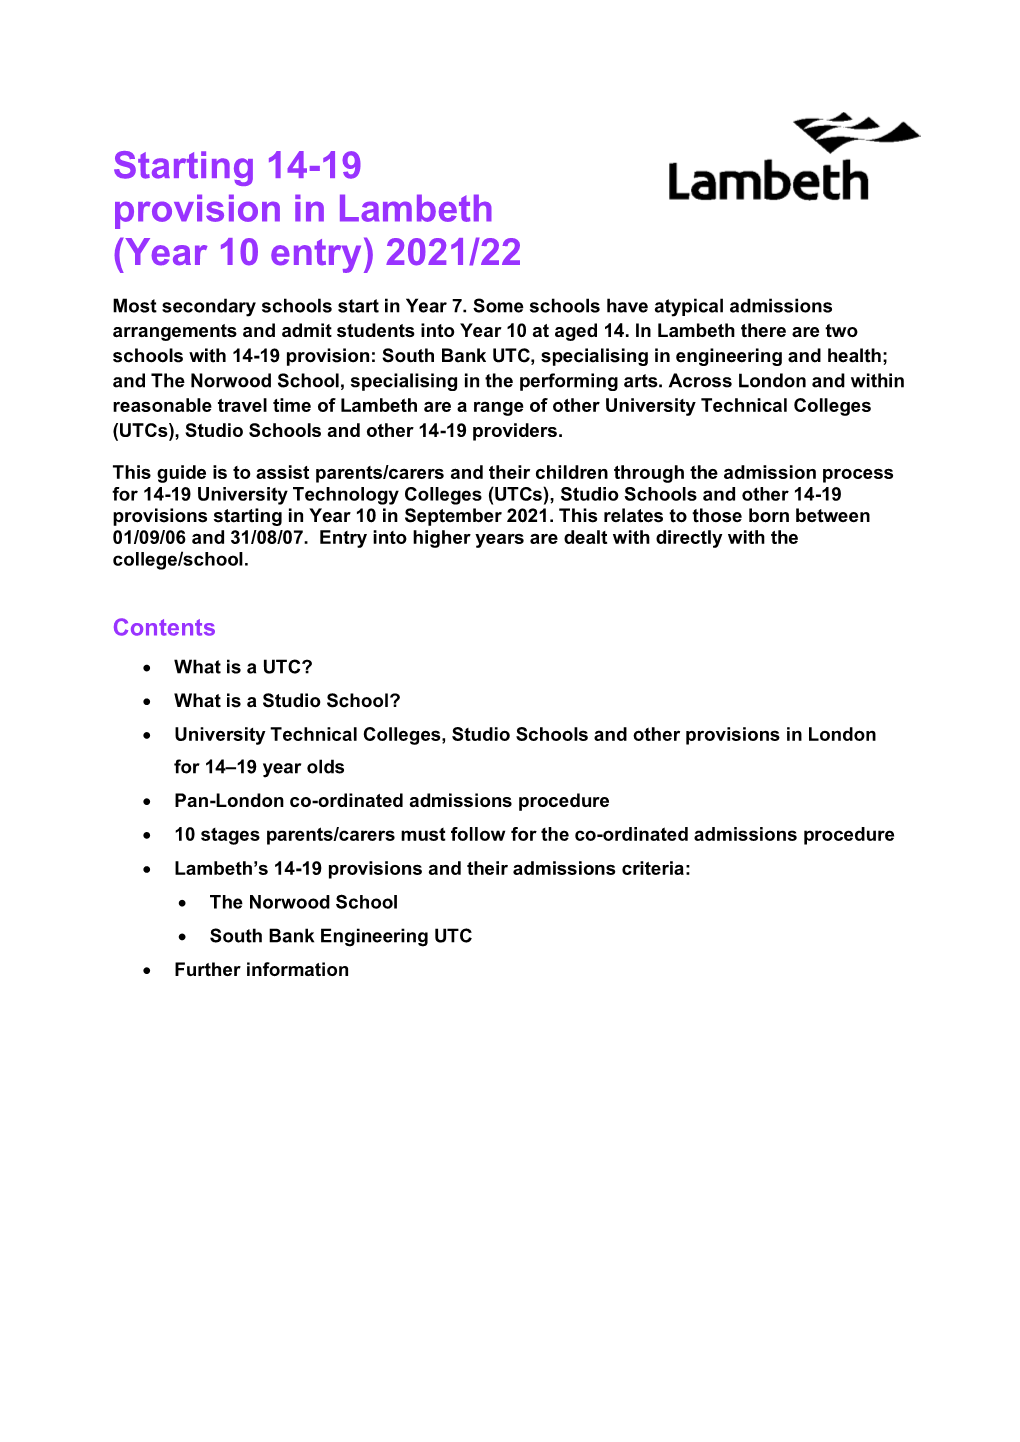 Starting 14-19 Provision in Lambeth (Year 10 Entry) 2021/22